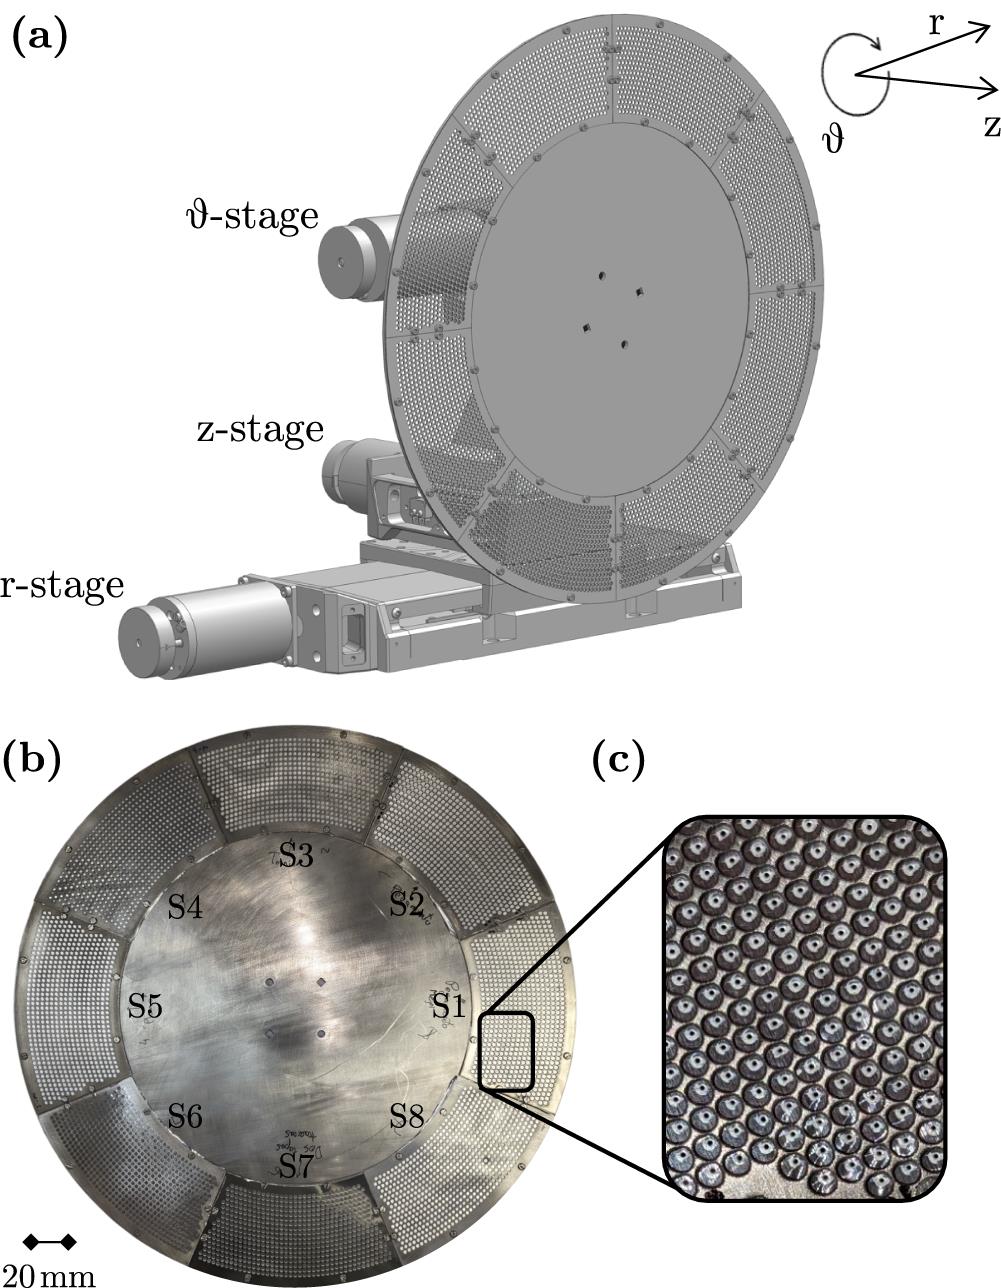 (a) Drawing of the target assembly, depicting the three motorized stages and a rotating wheel. (b) Picture of a target wheel design for 10 Hz operation. (c) Zoomed-in picture of the target wheel, showing the craters on the targets after their irradiation.